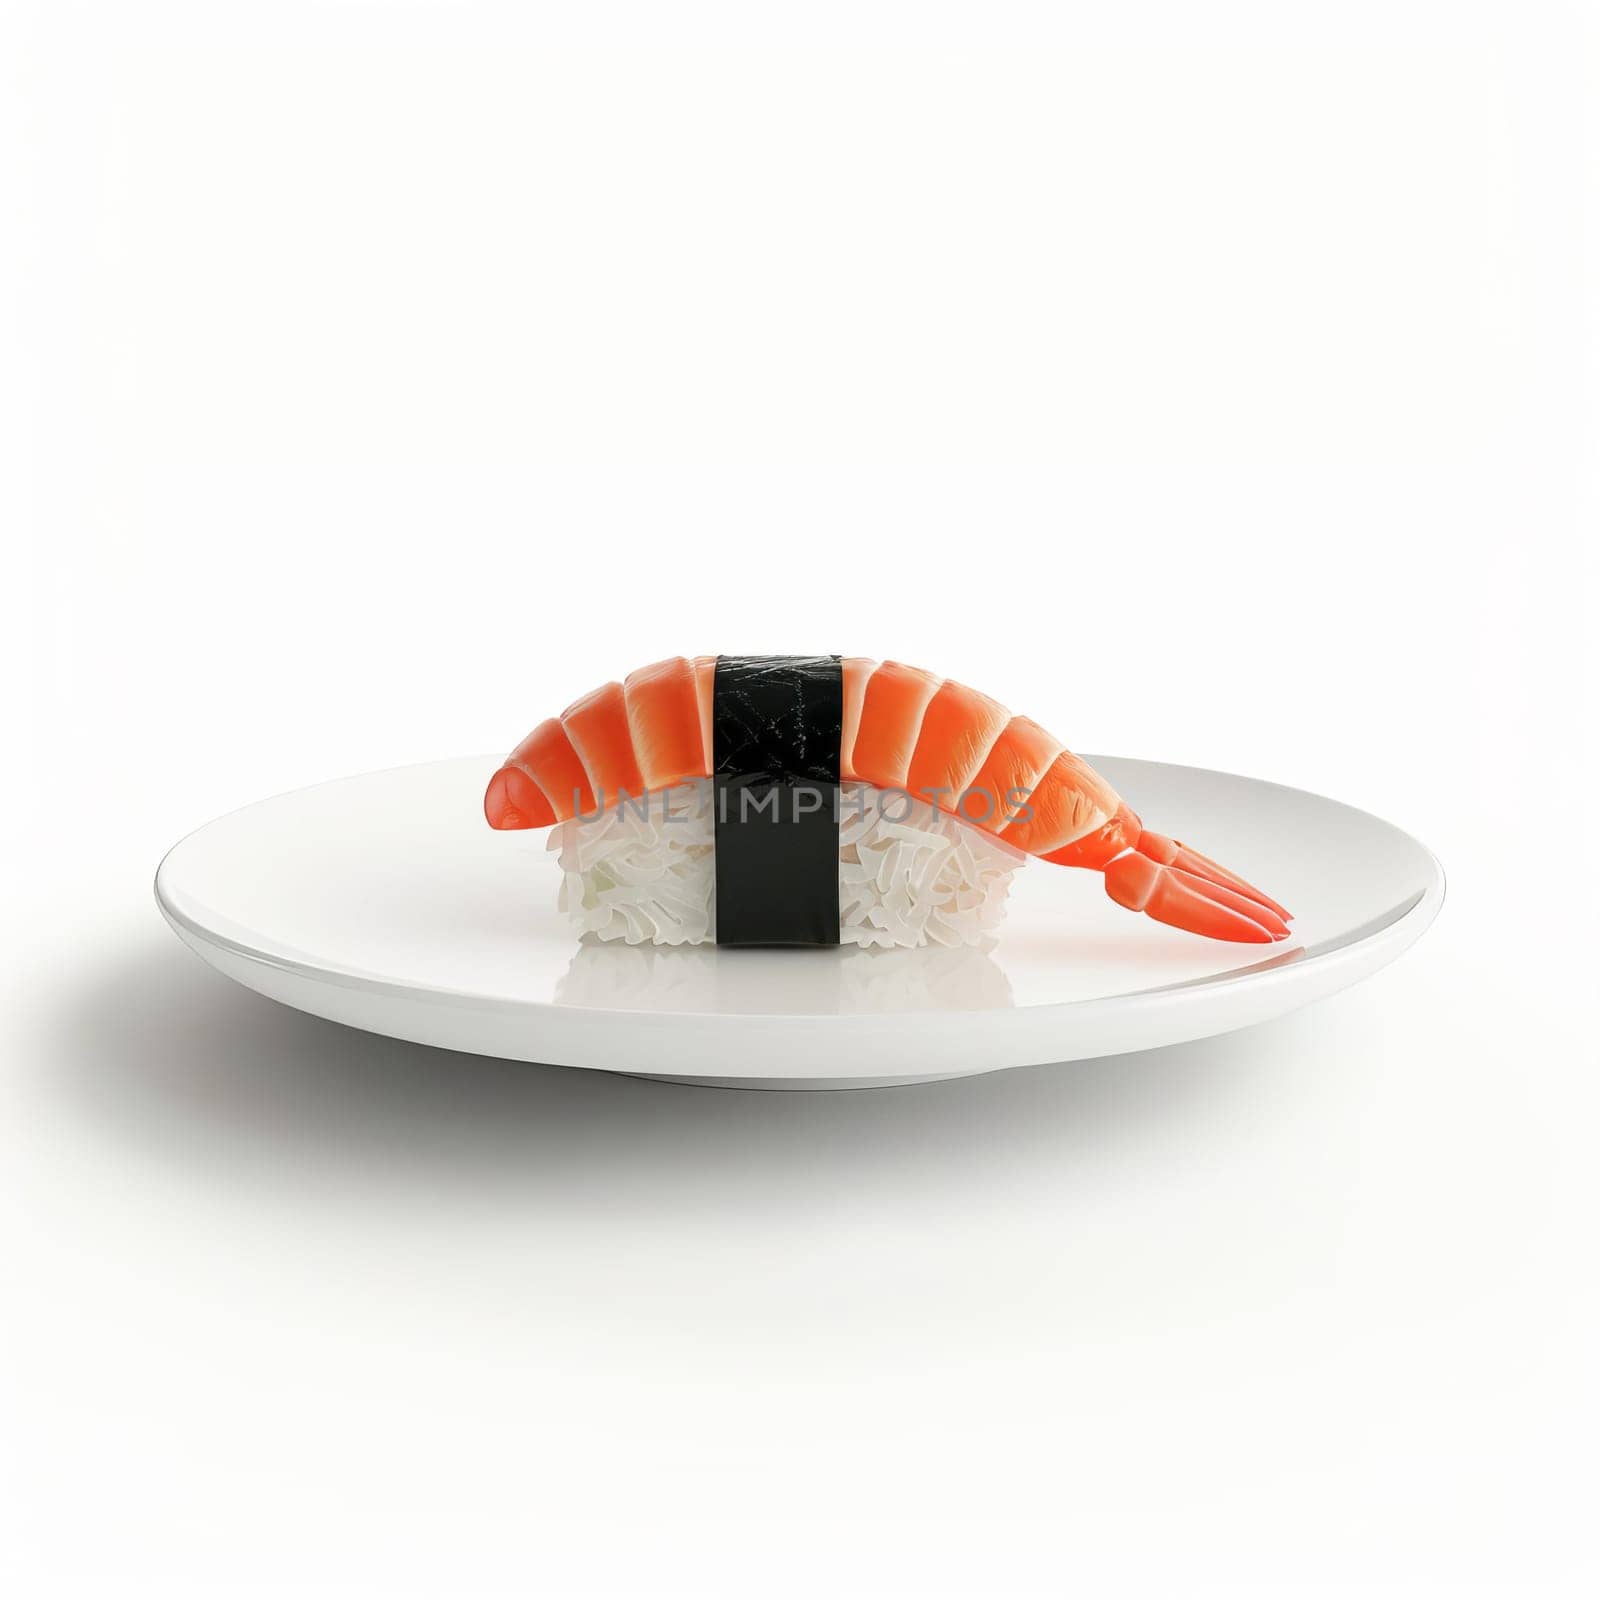 Sushi on a white Japanese plate on a white background. Japanese food.